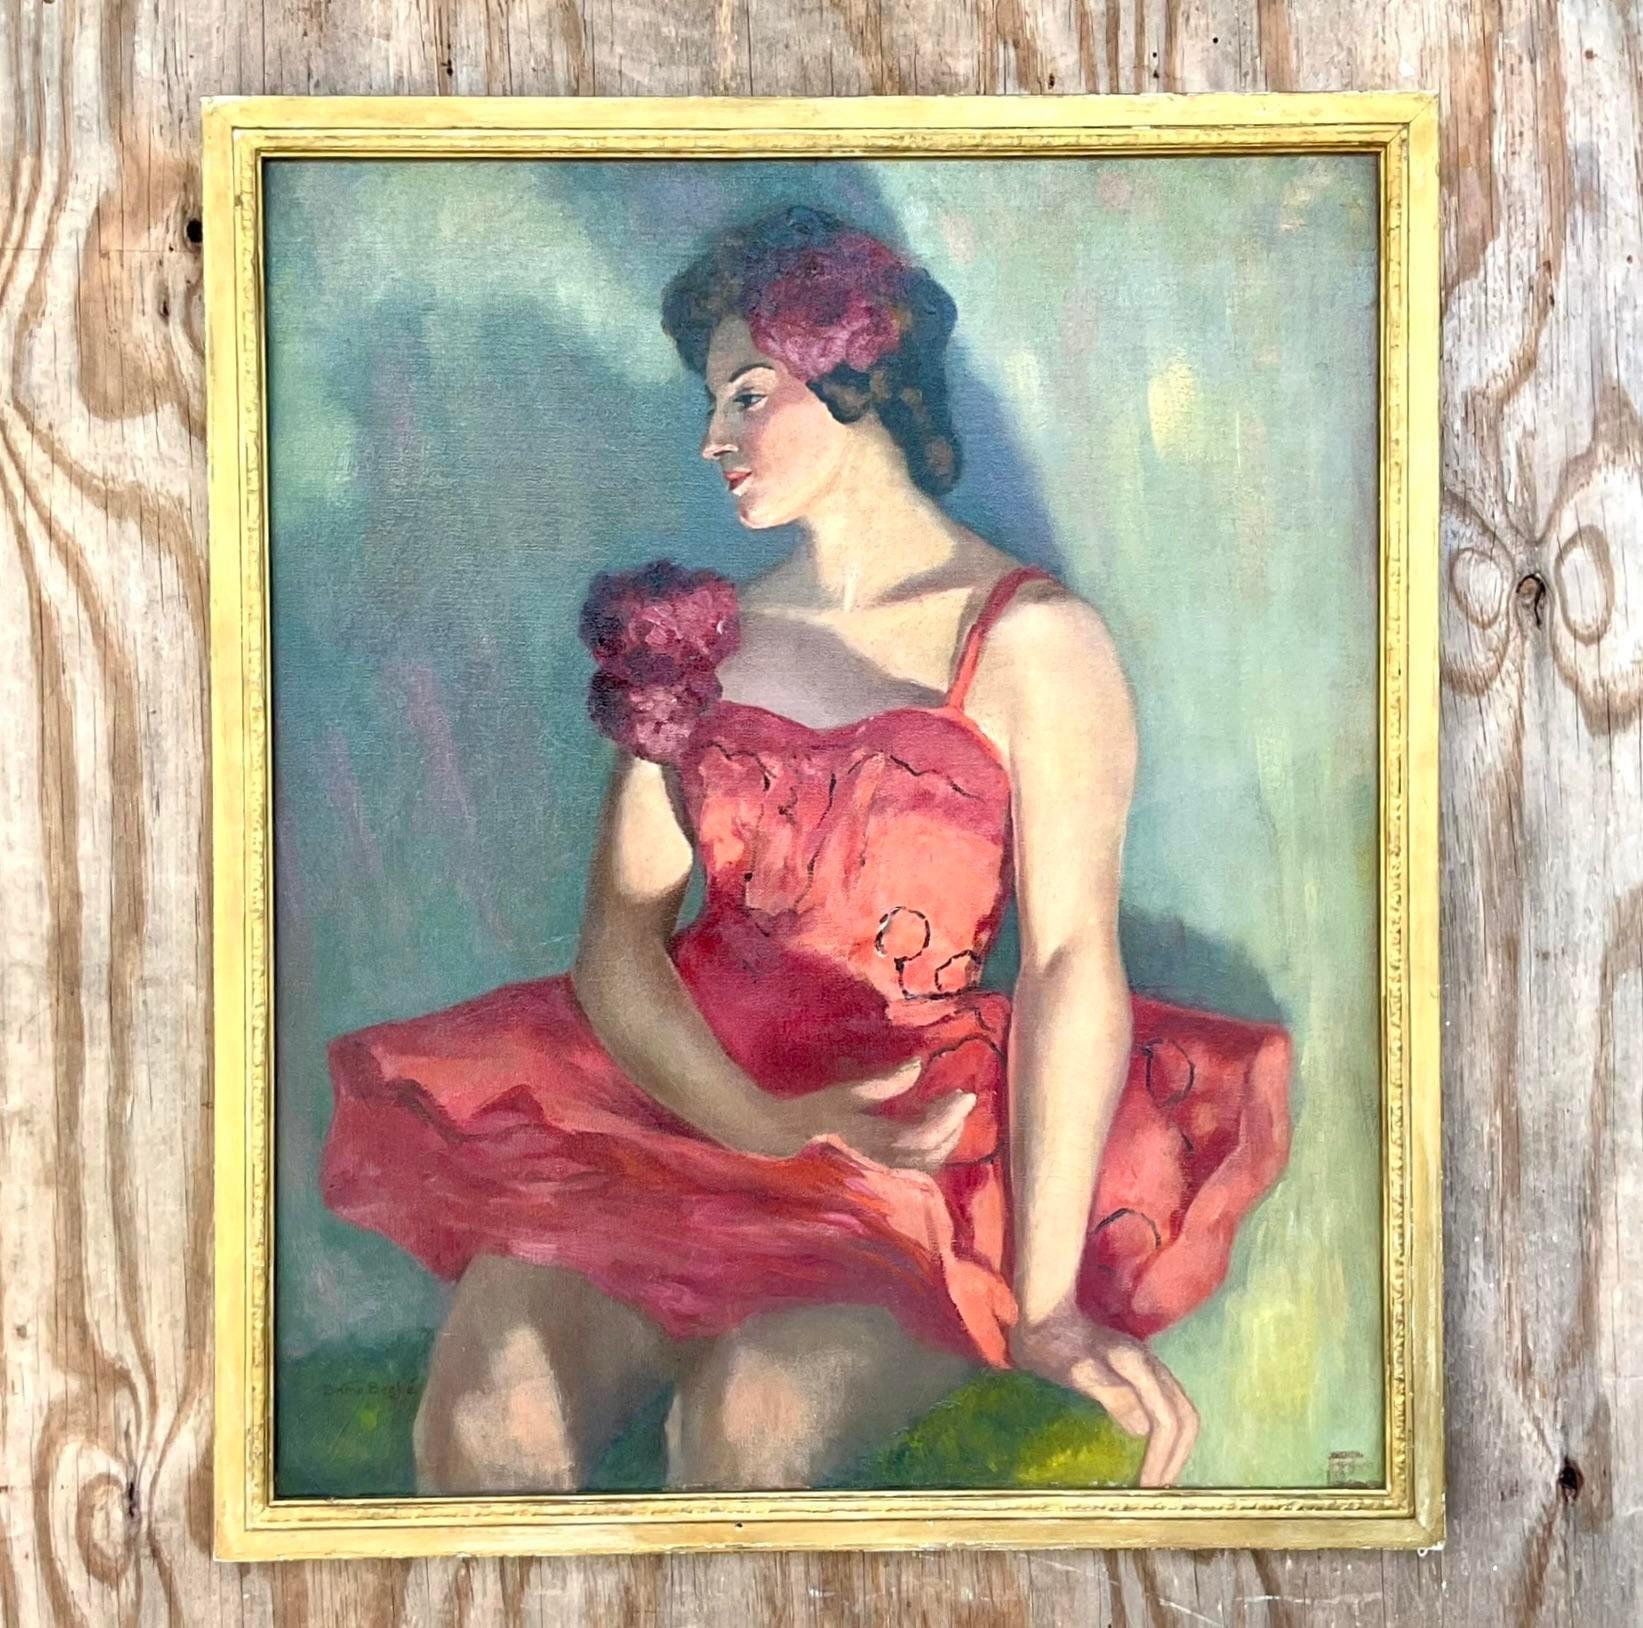 An exceptional vintage Original Oil Portrait on canvas. A striking composition of a beautiful dancer in costume. Signed and dated 1954. Acquired from a Palm Beach estate.